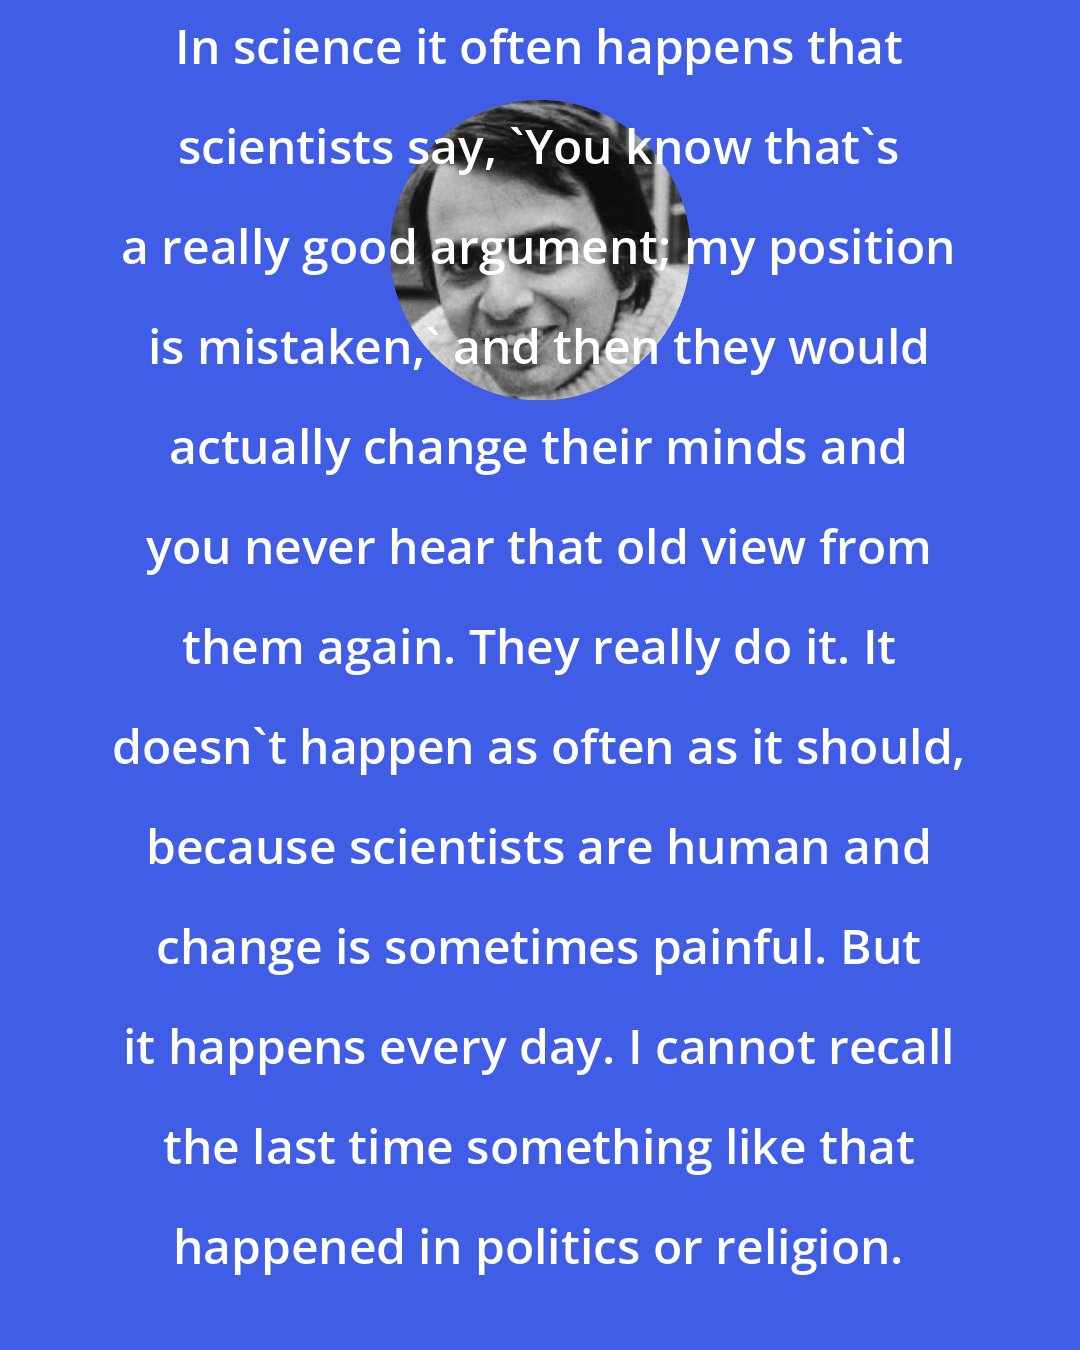 Carl Sagan: In science it often happens that scientists say, 'You know that's a really good argument; my position is mistaken,' and then they would actually change their minds and you never hear that old view from them again. They really do it. It doesn't happen as often as it should, because scientists are human and change is sometimes painful. But it happens every day. I cannot recall the last time something like that happened in politics or religion.